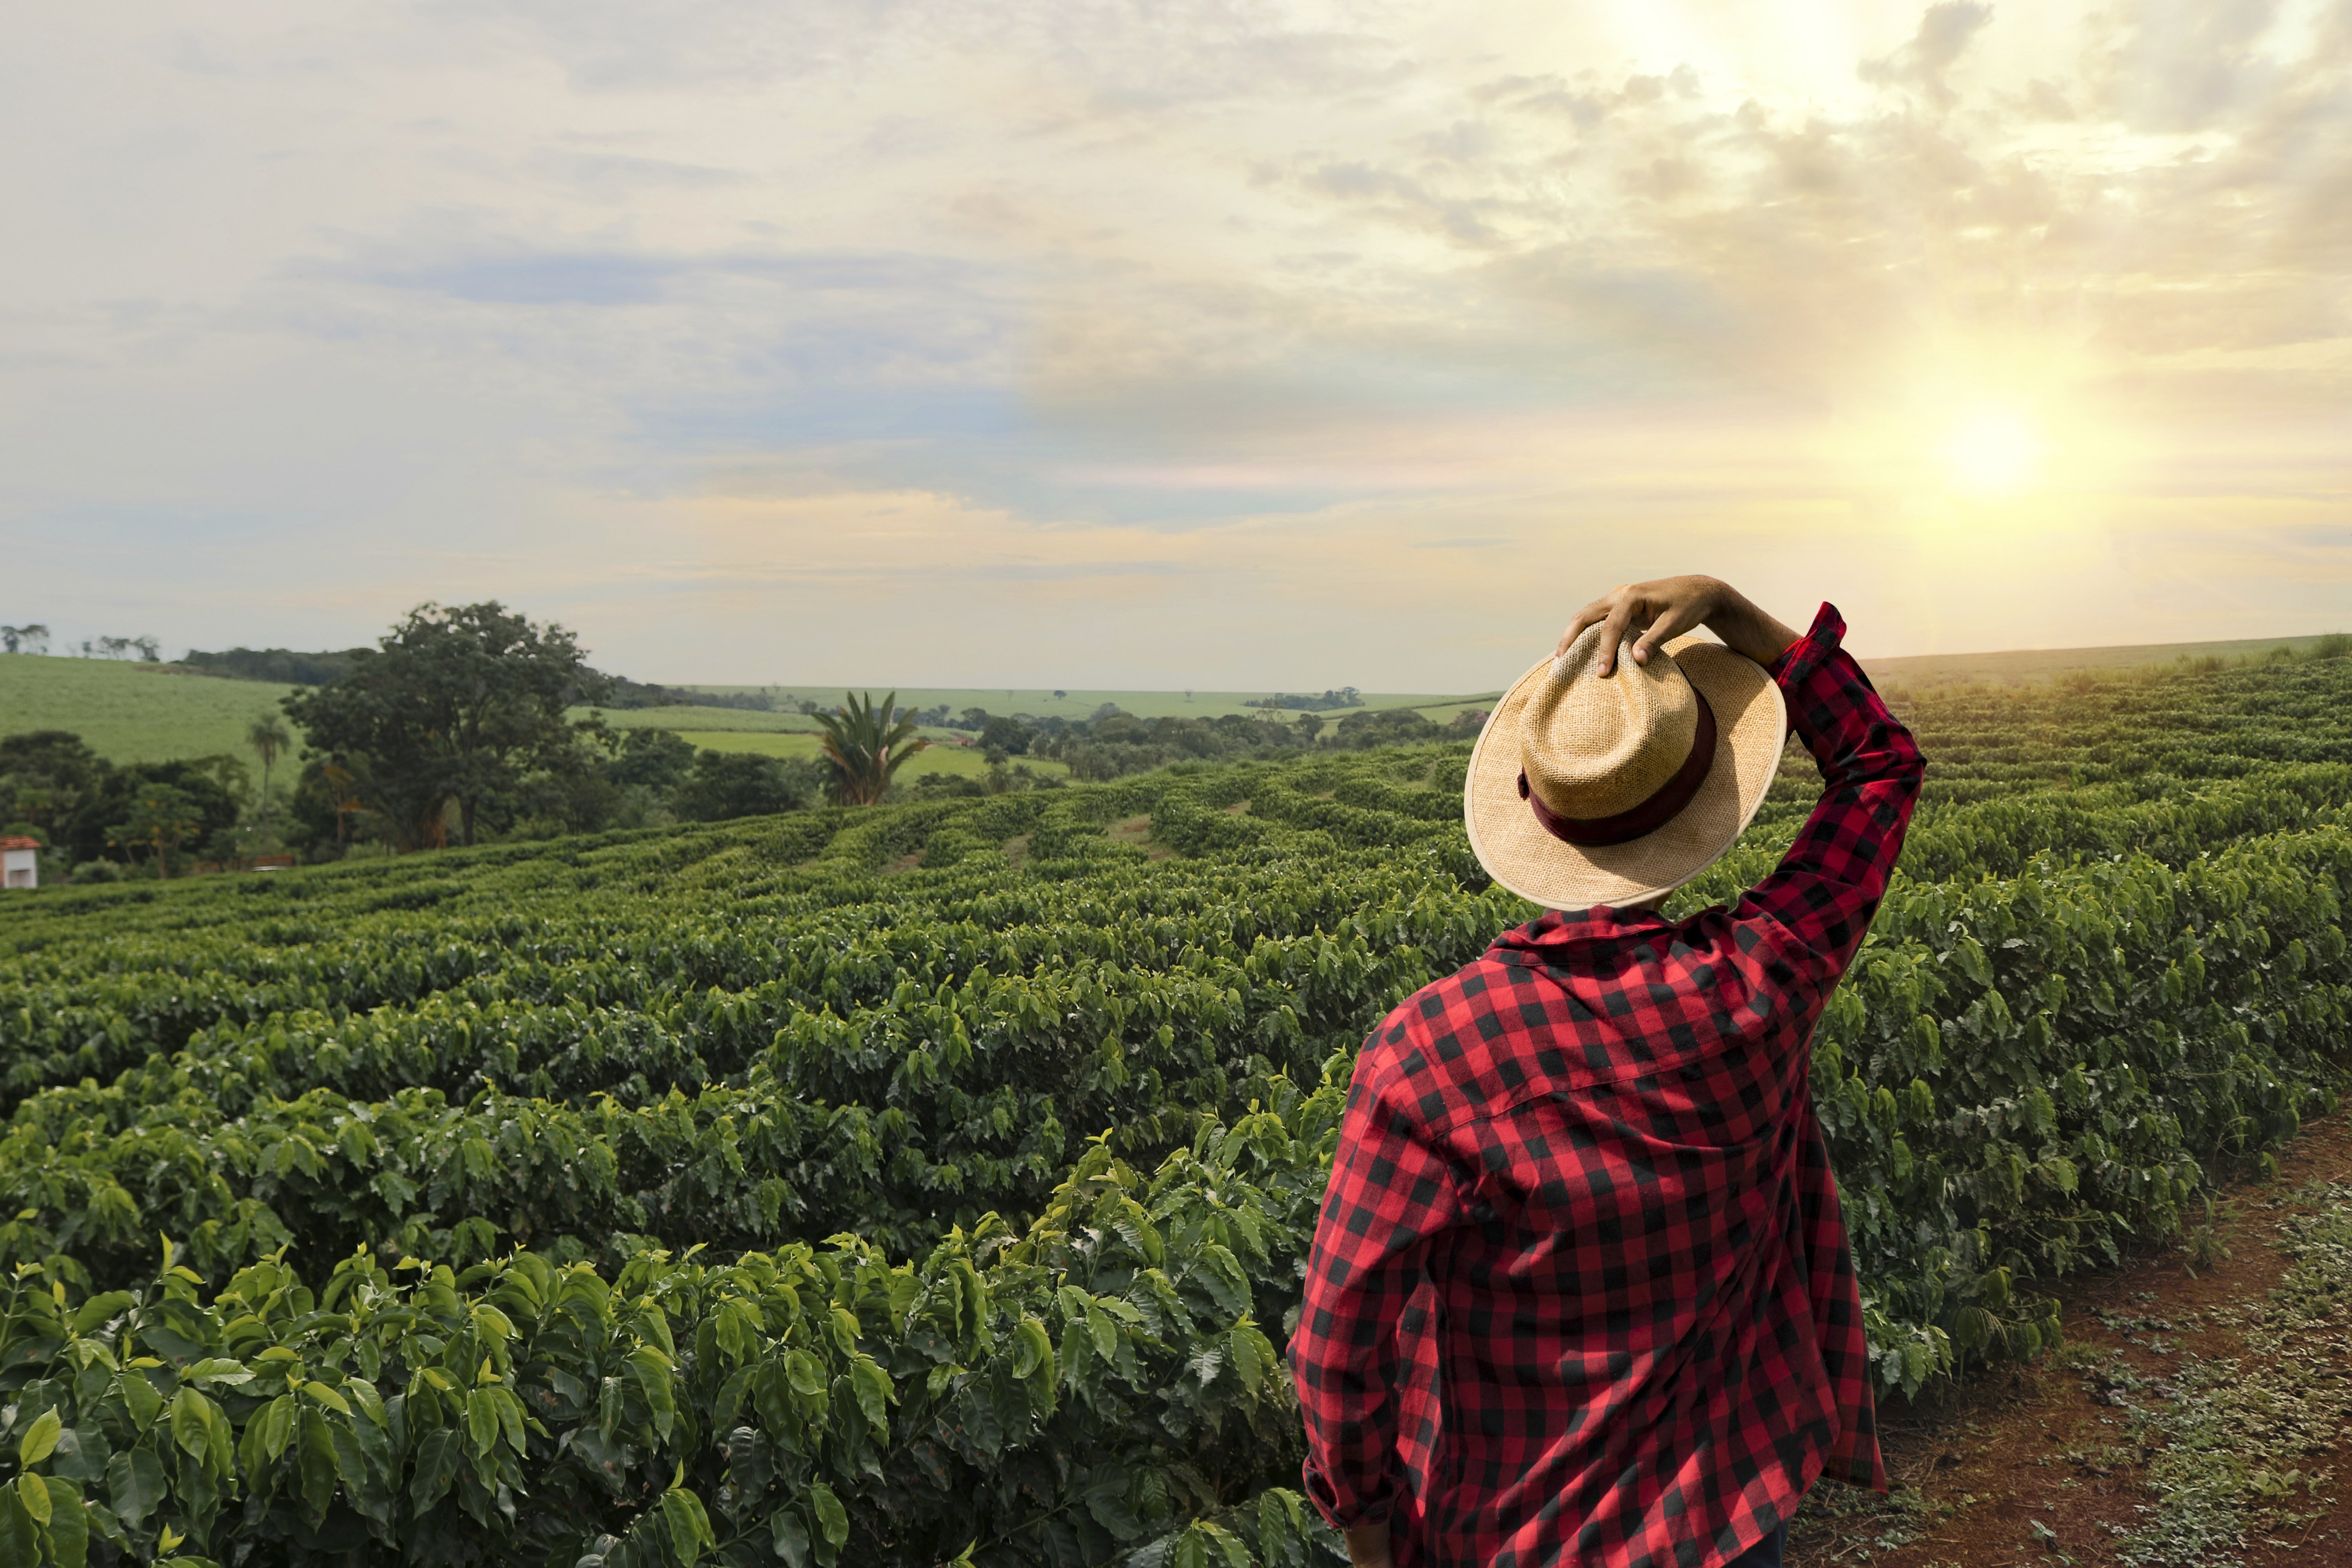 Farmer working on coffee field at sunset outdoor | Photo: Shutterstock.com